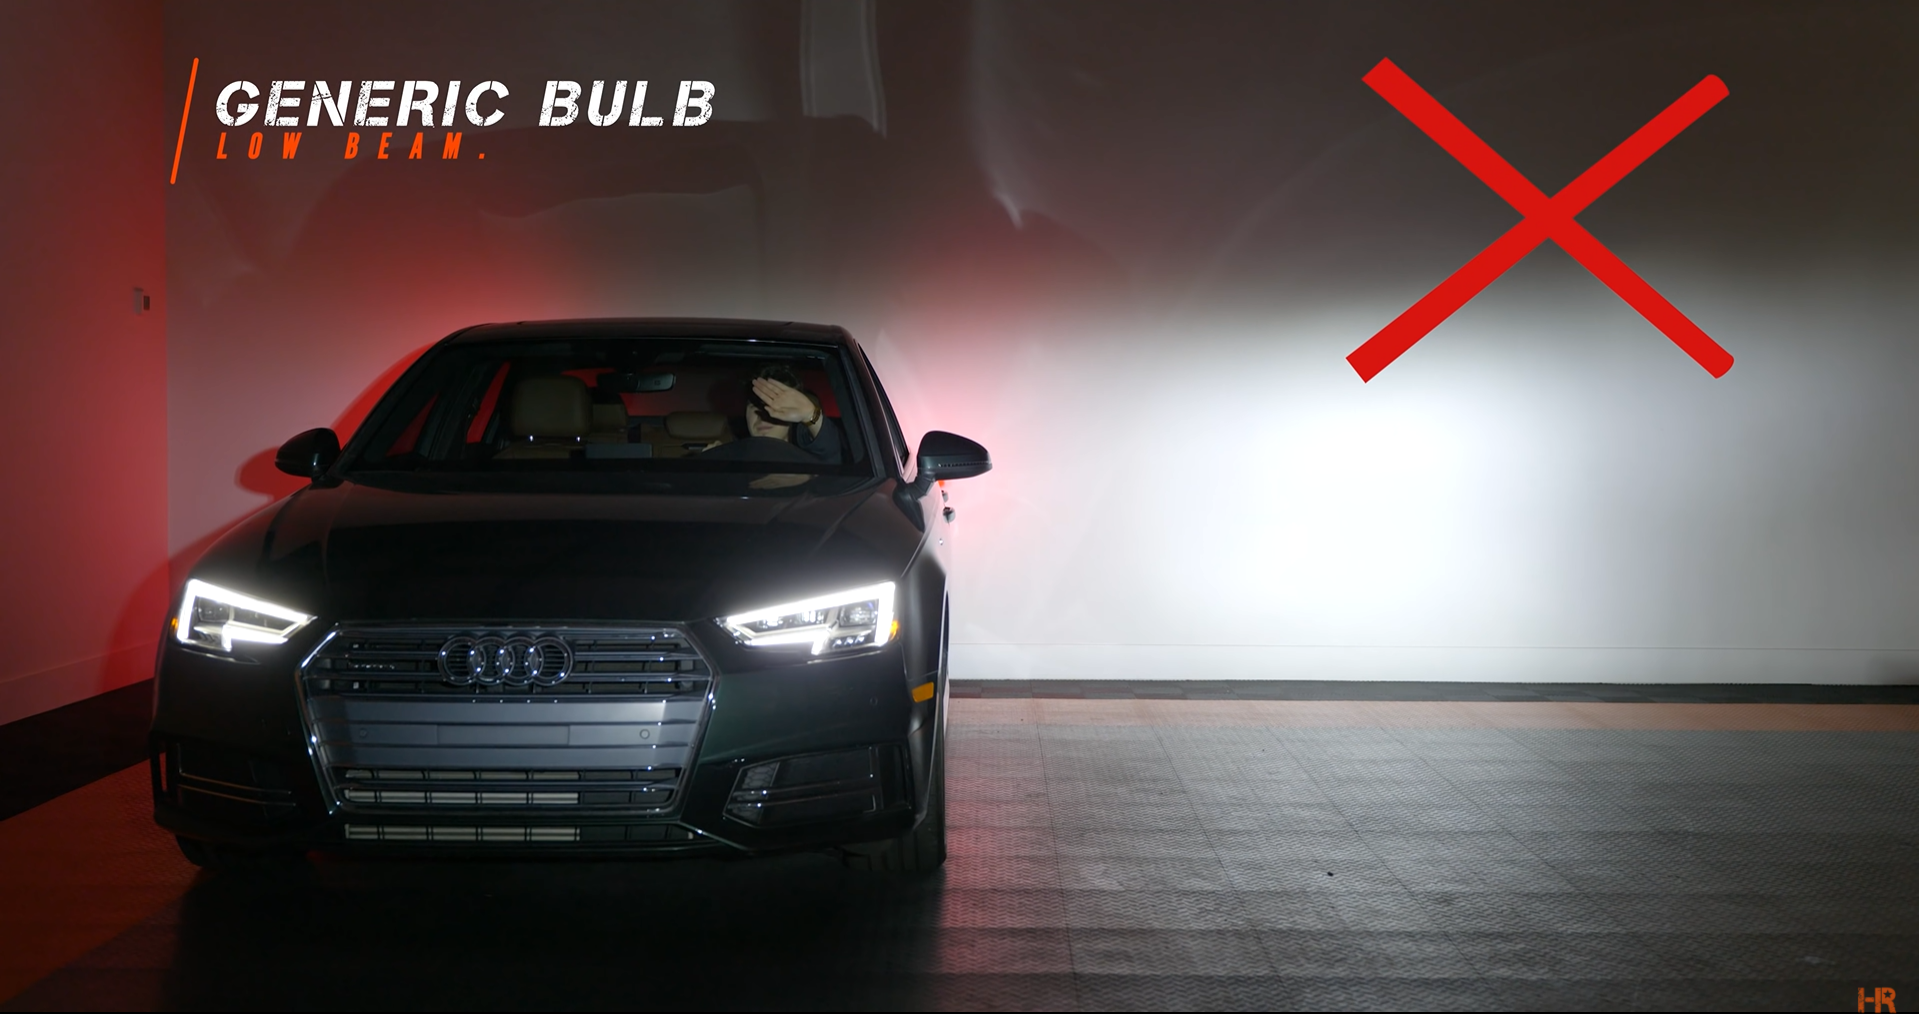 Projector vs Reflector Headlights: Making the Right Choice